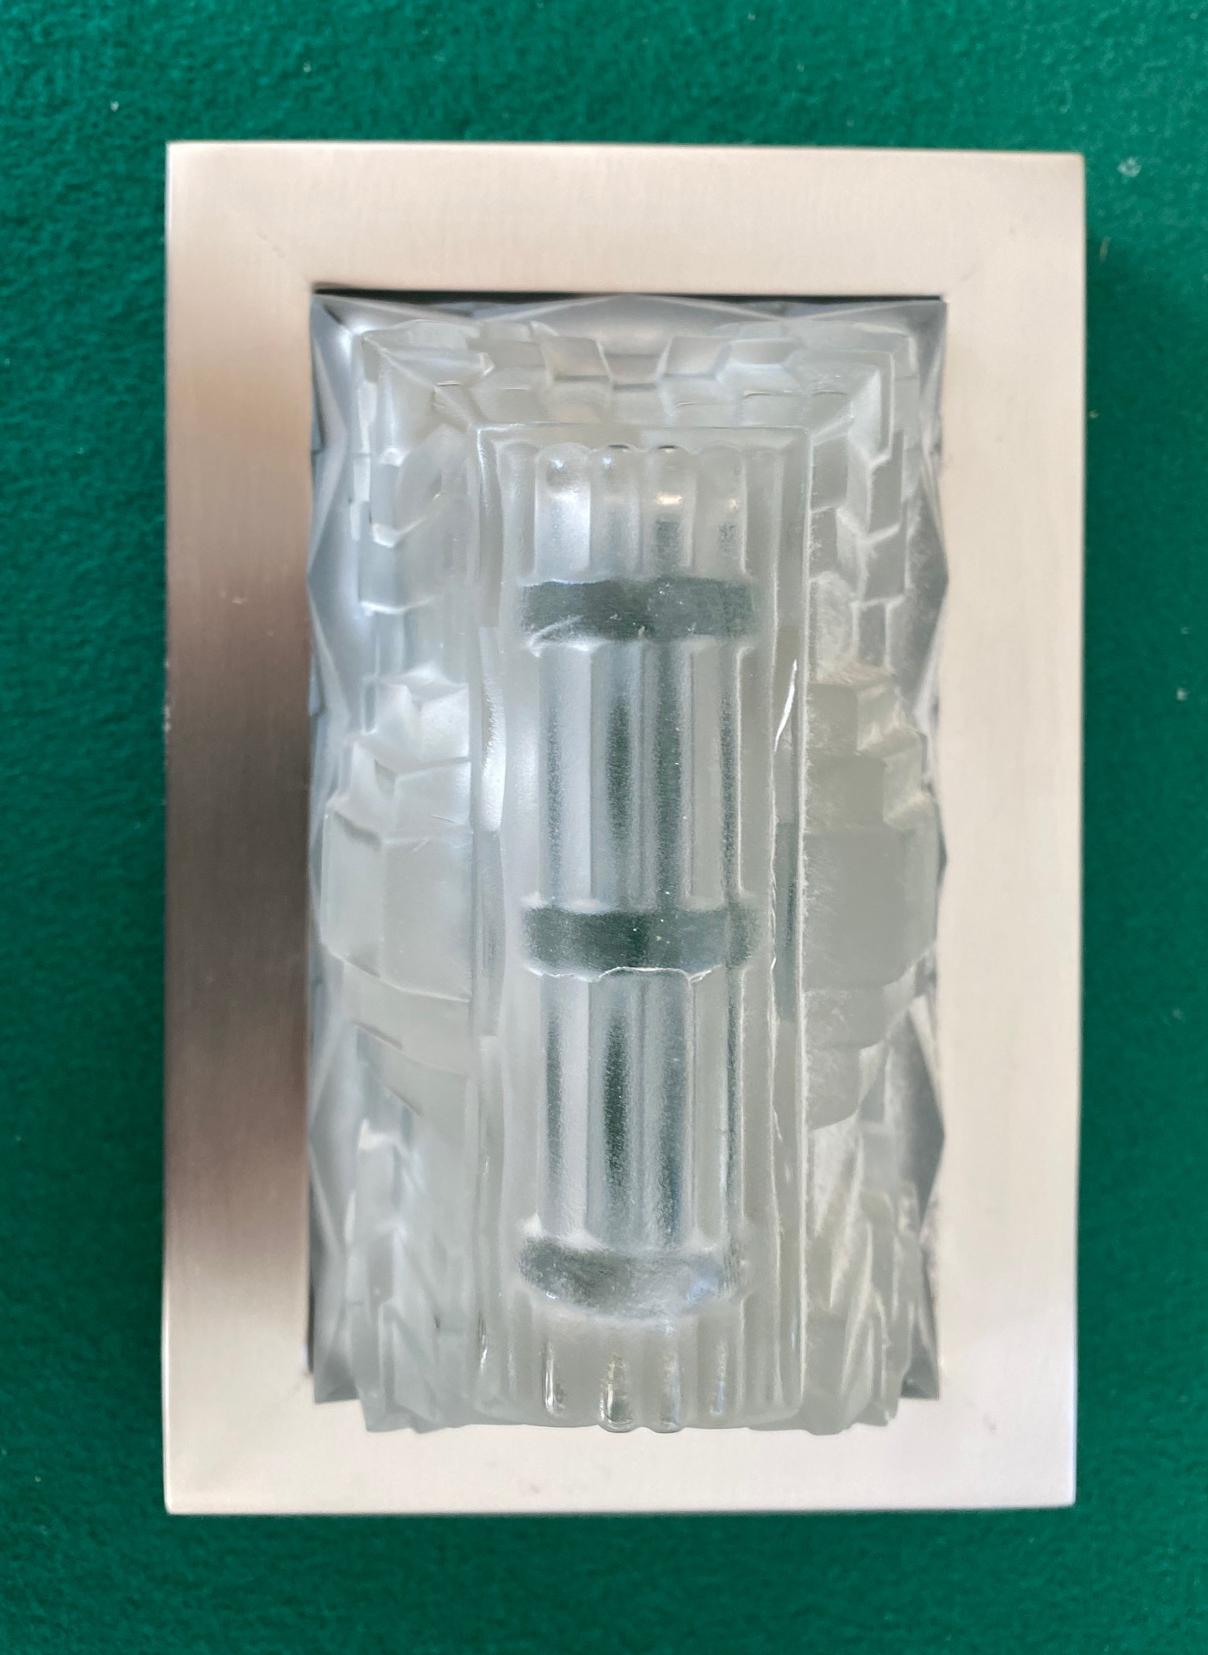 Art Deco flush mount or wall-sconce in clear and frosted glass in a satin nickel frame, electrified, ready to go on a wall or ceiling.